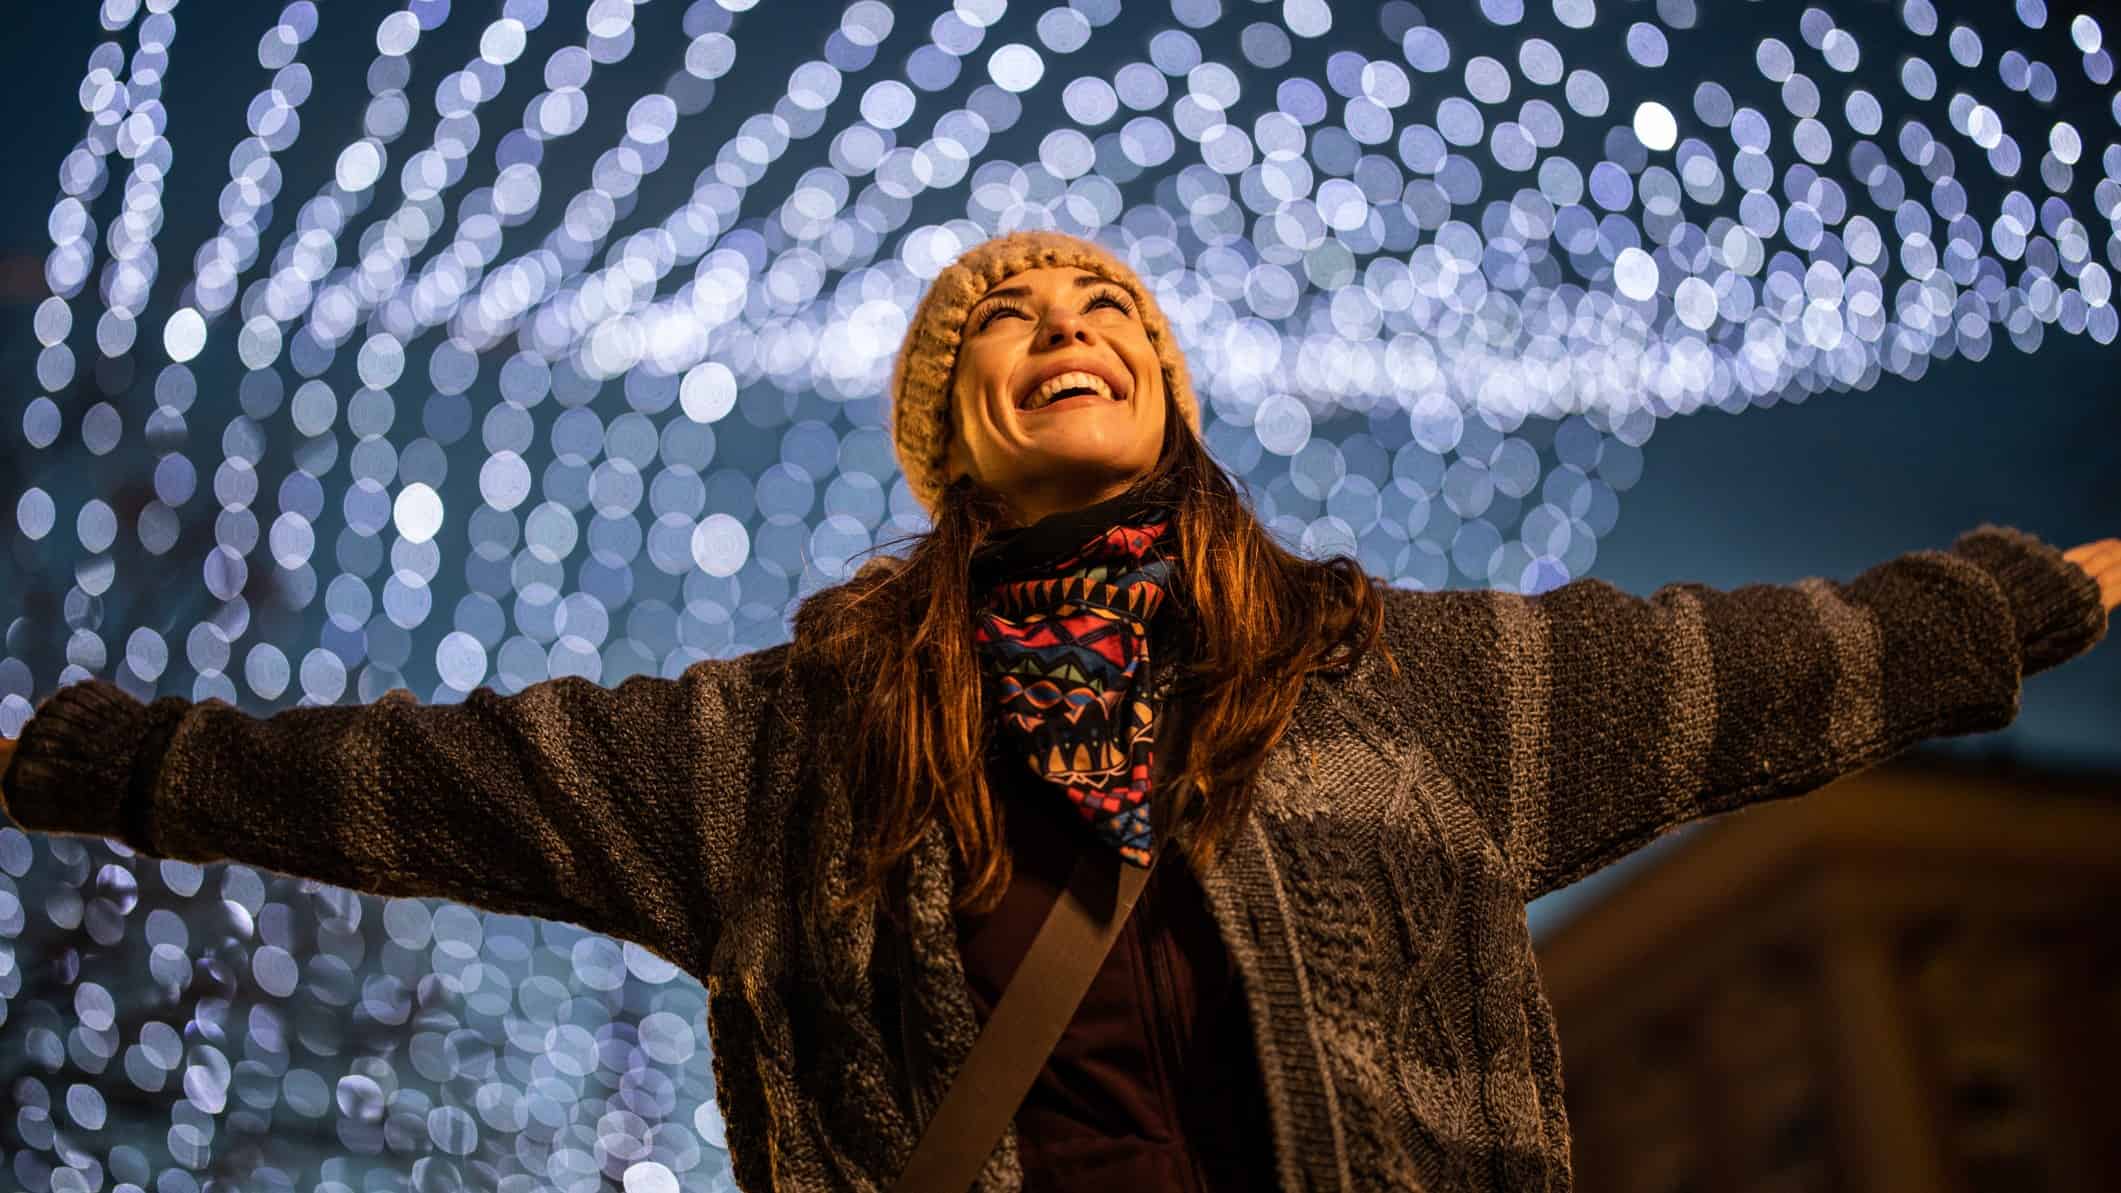 a woman holds her arms wide and looks up with an excited and joyous expression on her face as she looks up into a ceiling filled with multiple strings of glowing lights at night time.